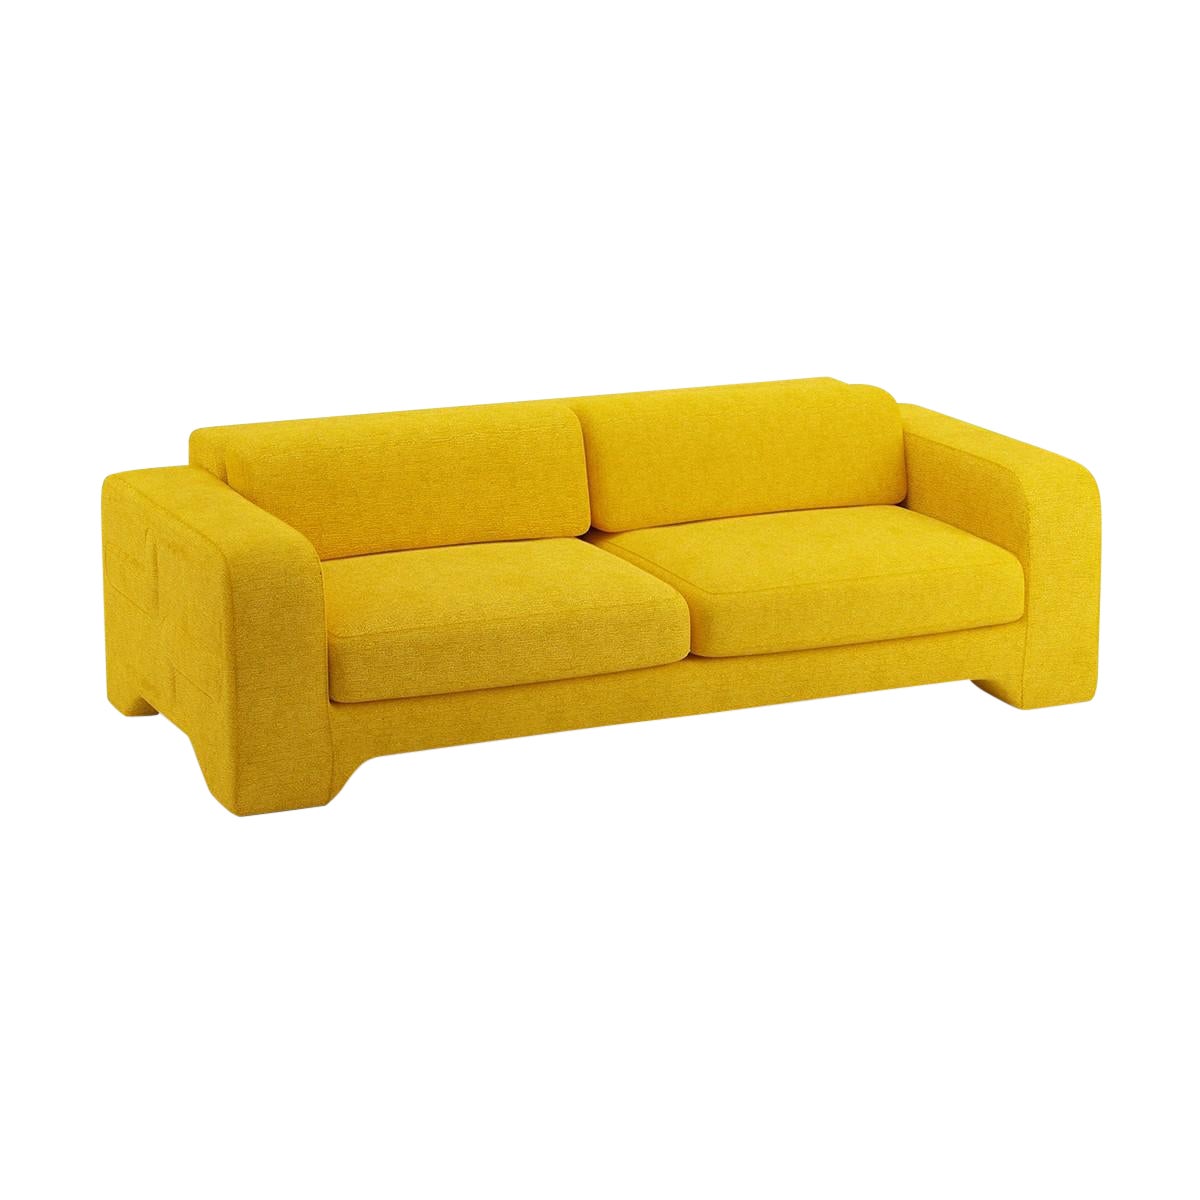 Popus Editions Giovanna 2.5 Seater Sofa in Corn Megeve Fabric with a Knit Effect